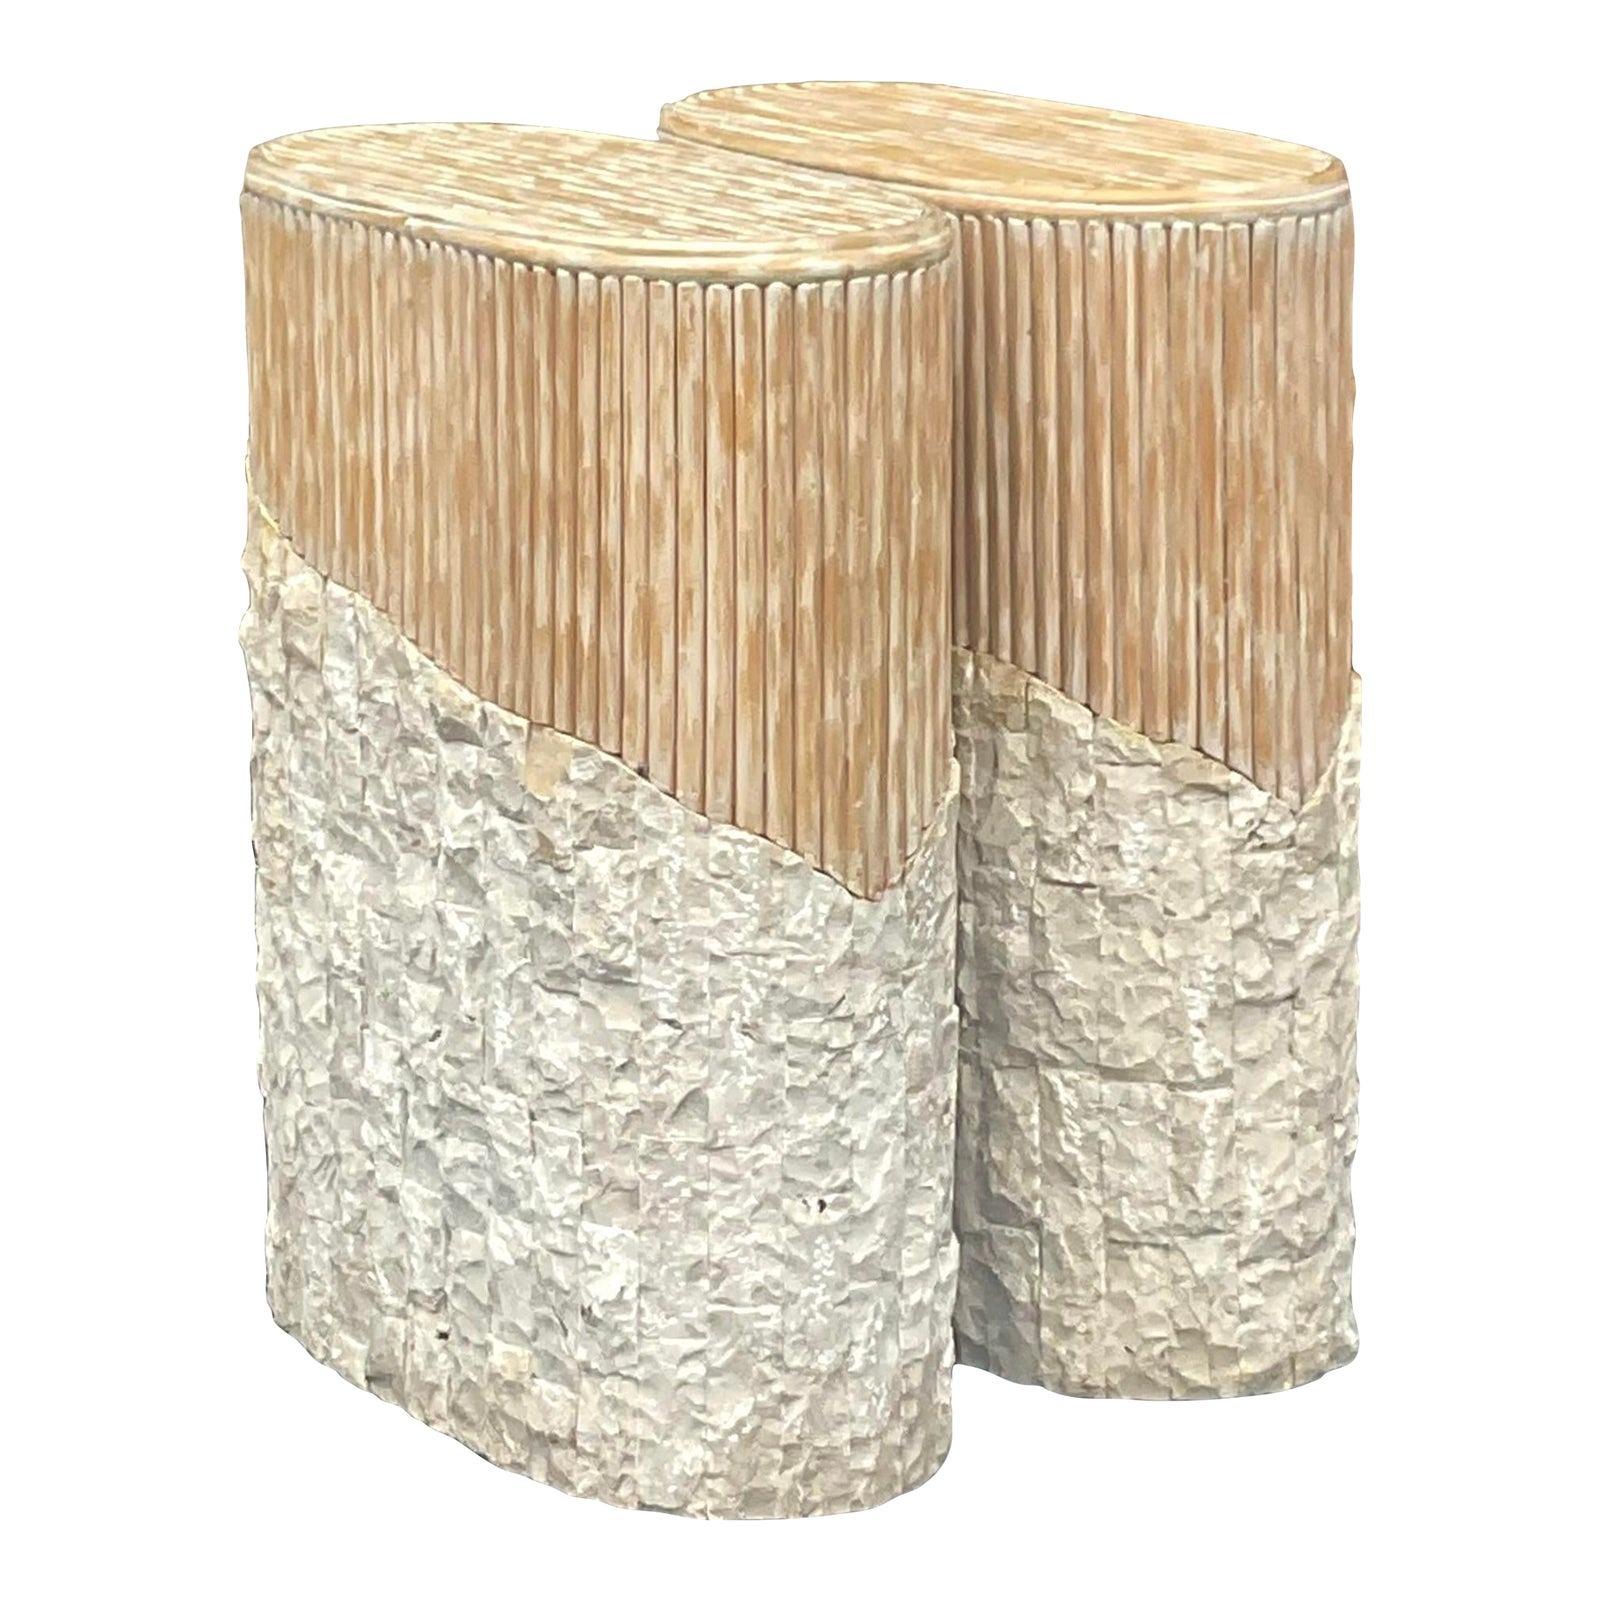 Late 20th Century Vintage Boho Cerused Reed &Tessellated Stone Pedestals For Sale